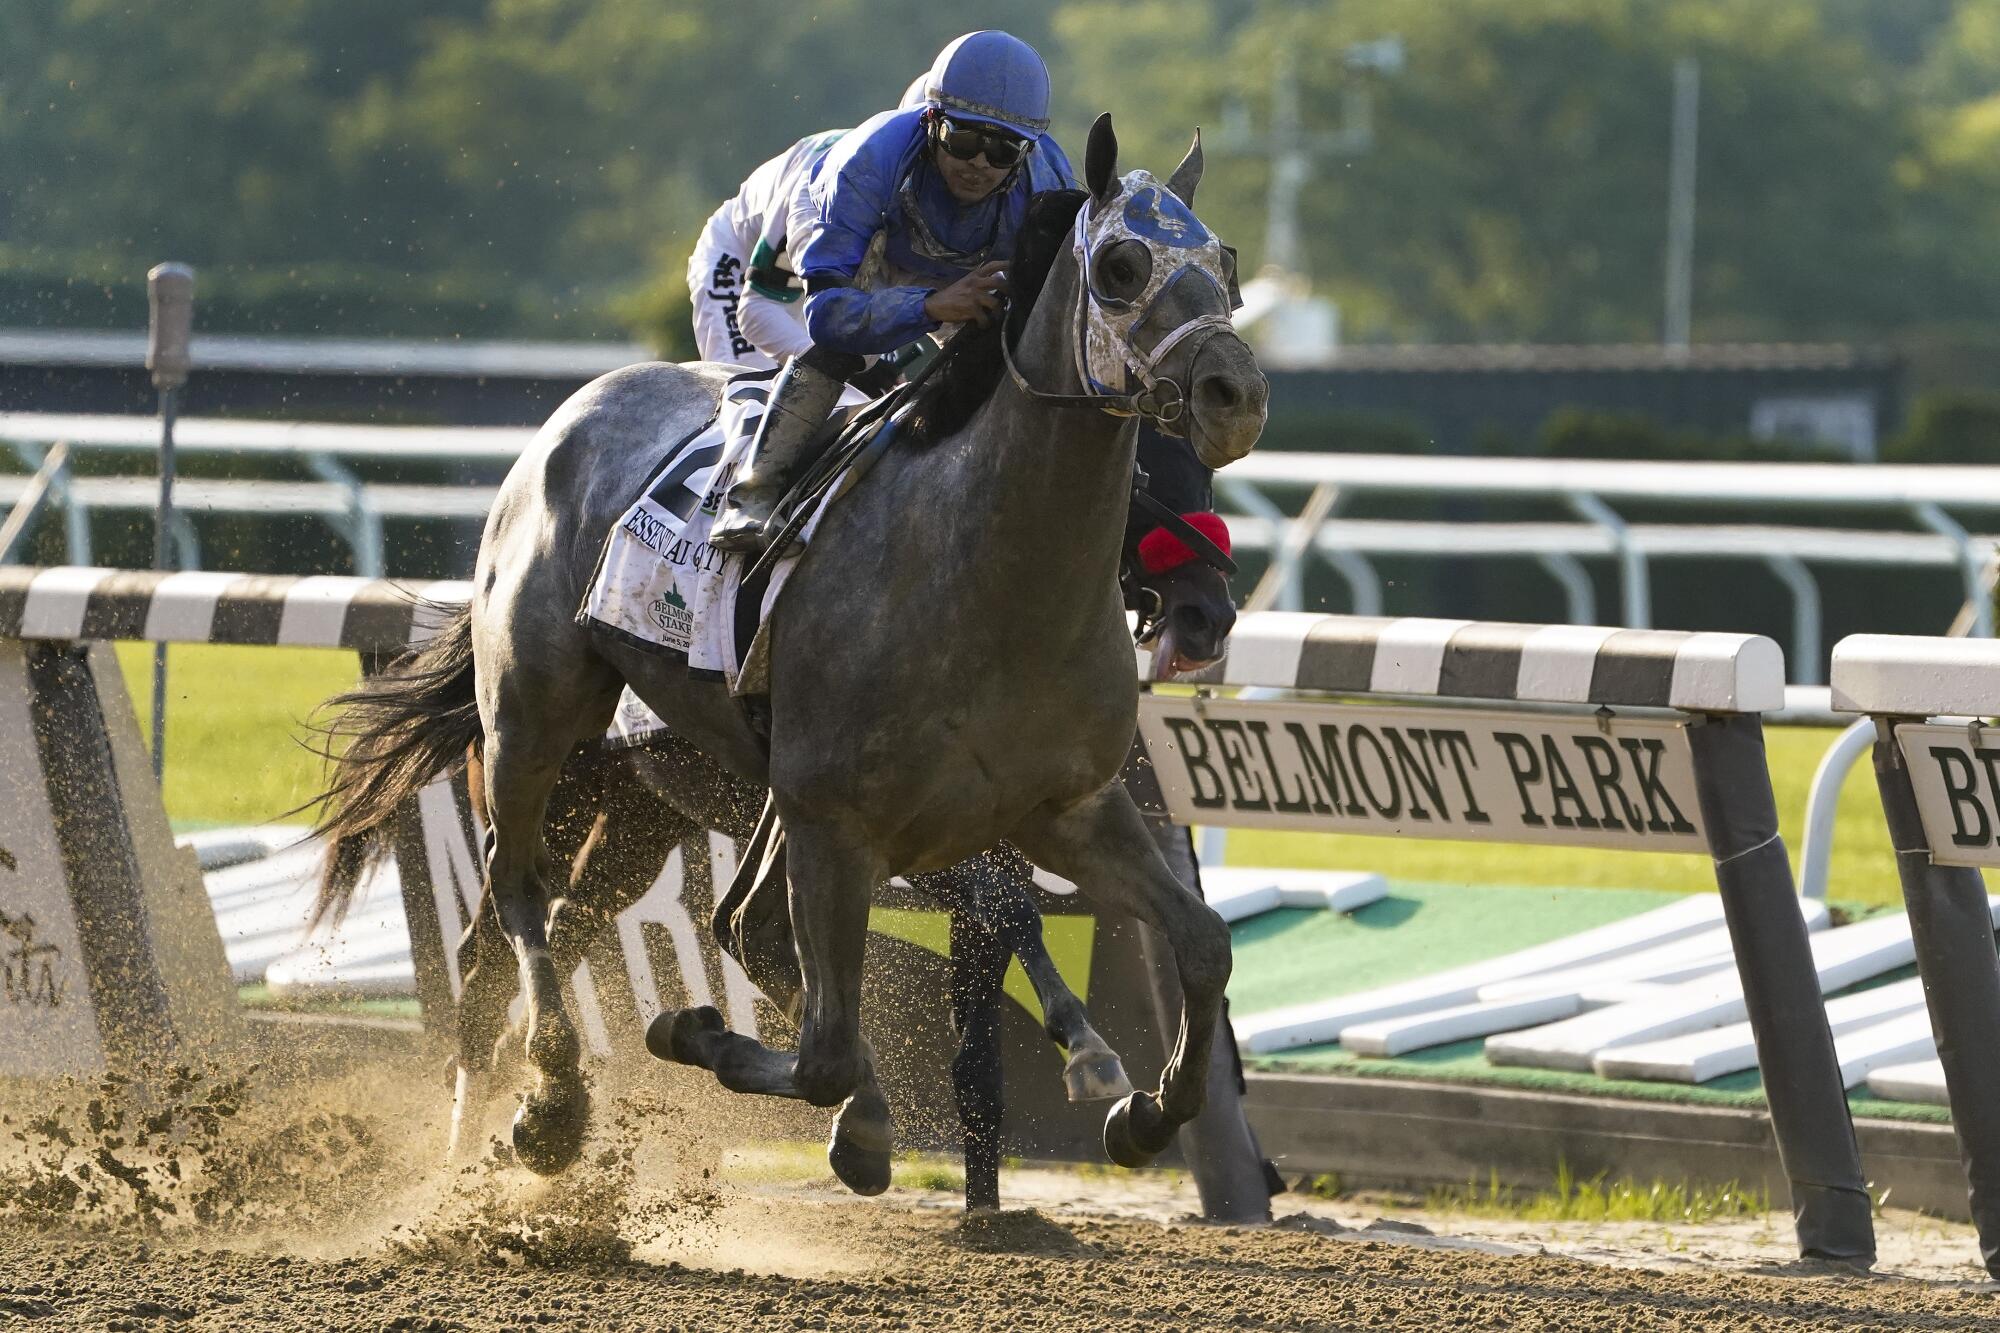 Jockey Luis Saez rides Essential Quality to victory in the 153rd running of the Belmont Stakes on Saturday.